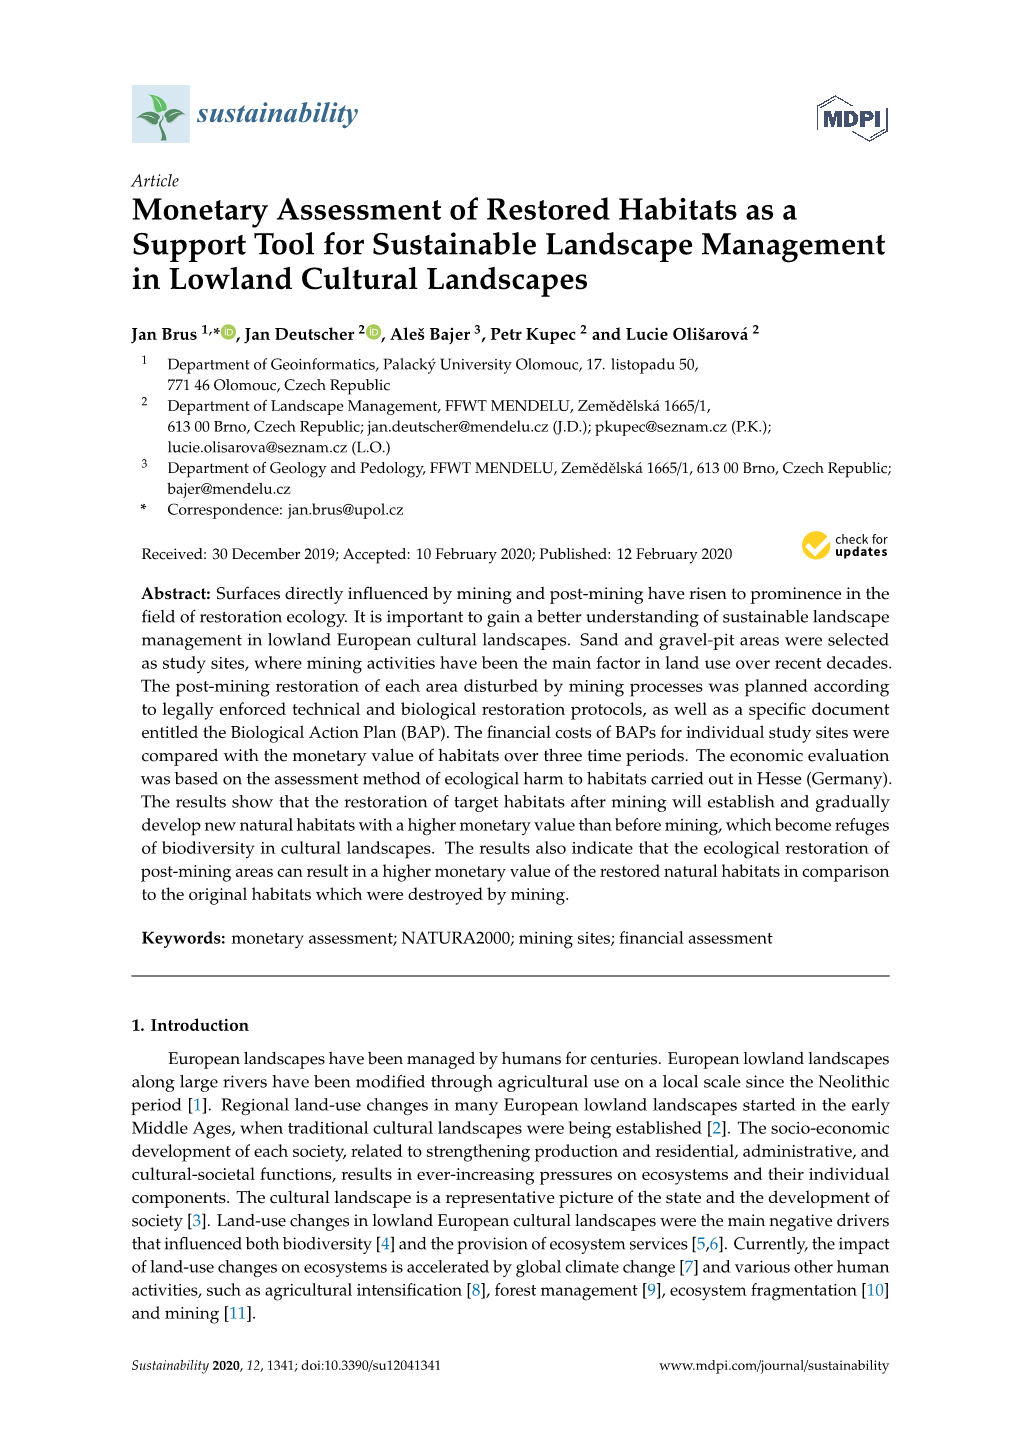 Monetary Assessment of Restored Habitats As a Support Tool for Sustainable Landscape Management in Lowland Cultural Landscapes